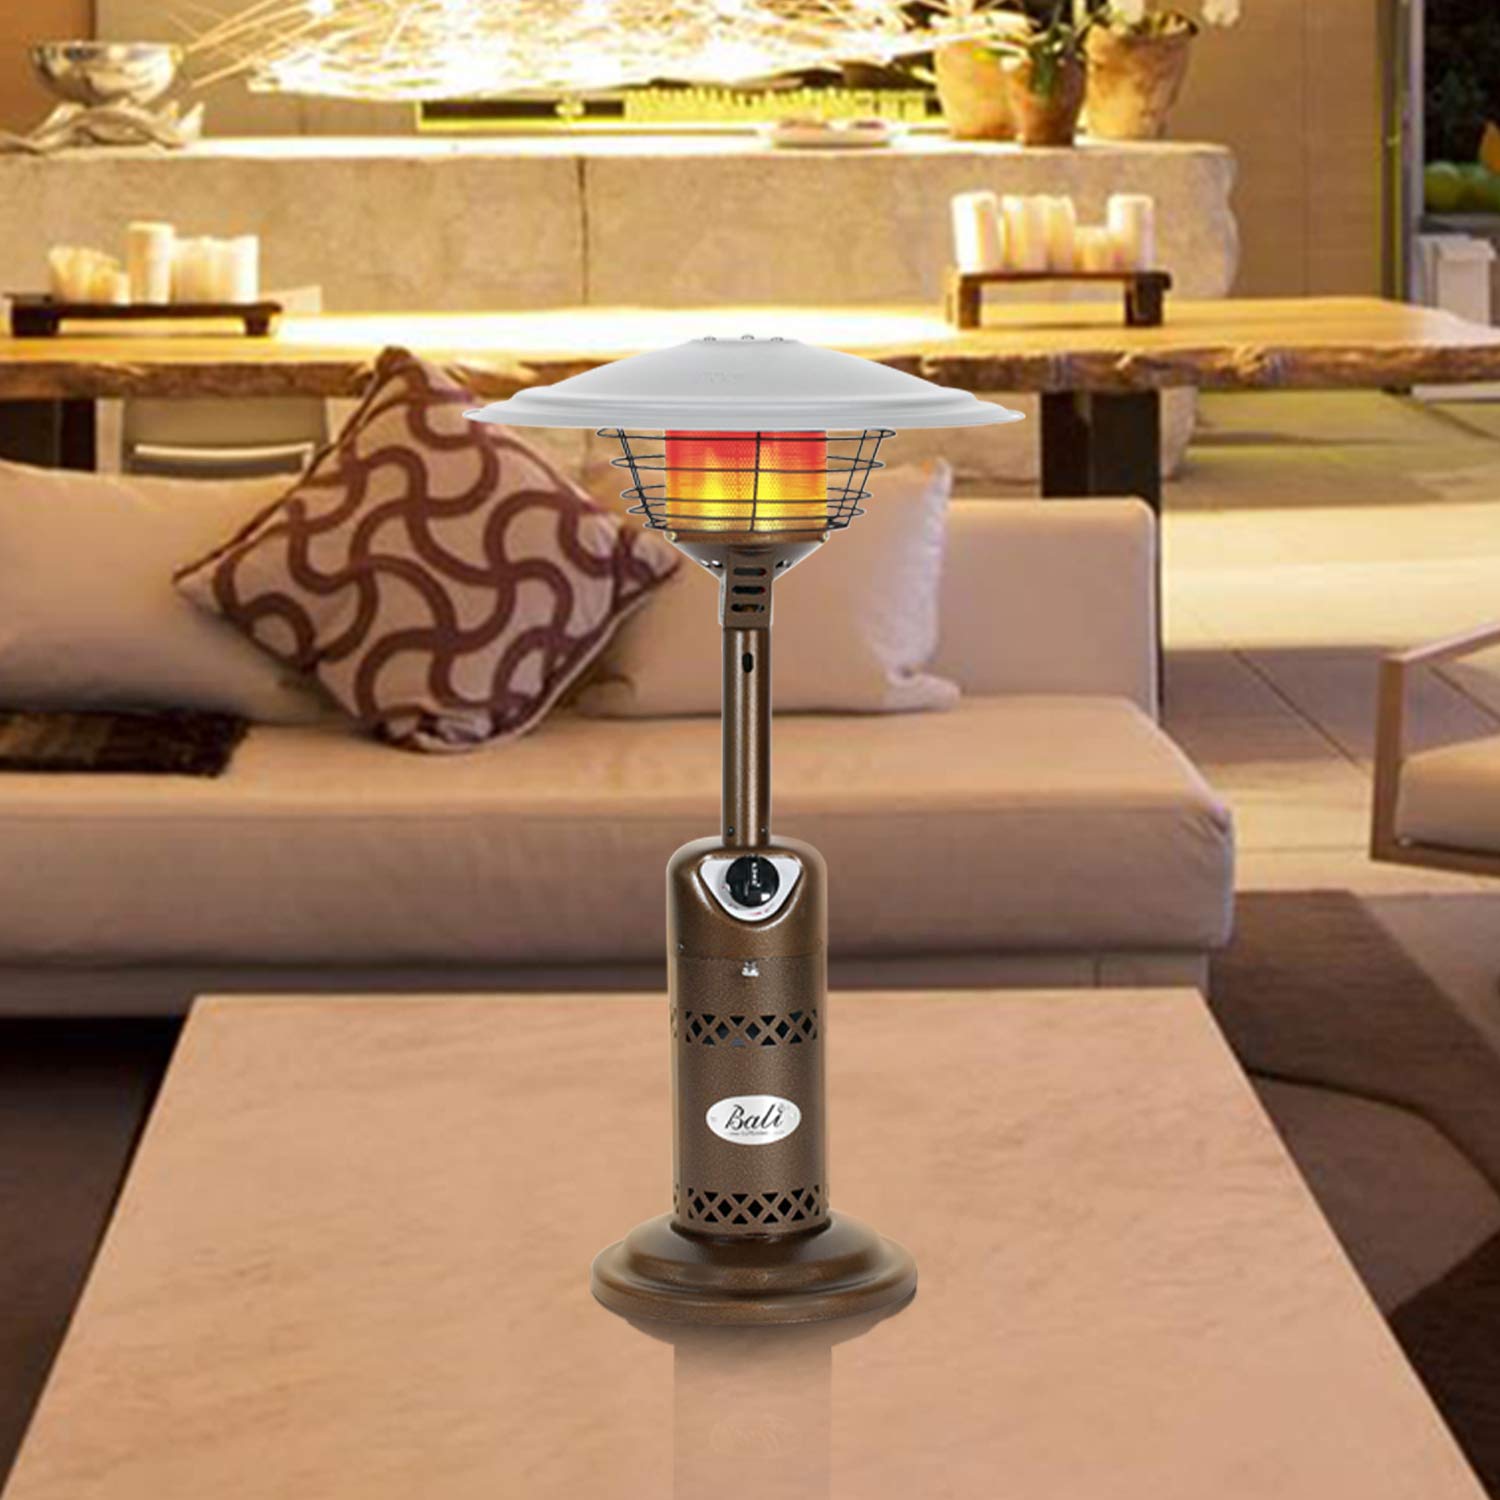 BALI OUTDOORS Patio Heater Gas Portable Tabletop Heater Propane Patio Heaters, Outdoor Table Top Heater W/Adjustable Thermostat, Suitable For Yard, Commercial Restaurant, Gazebo